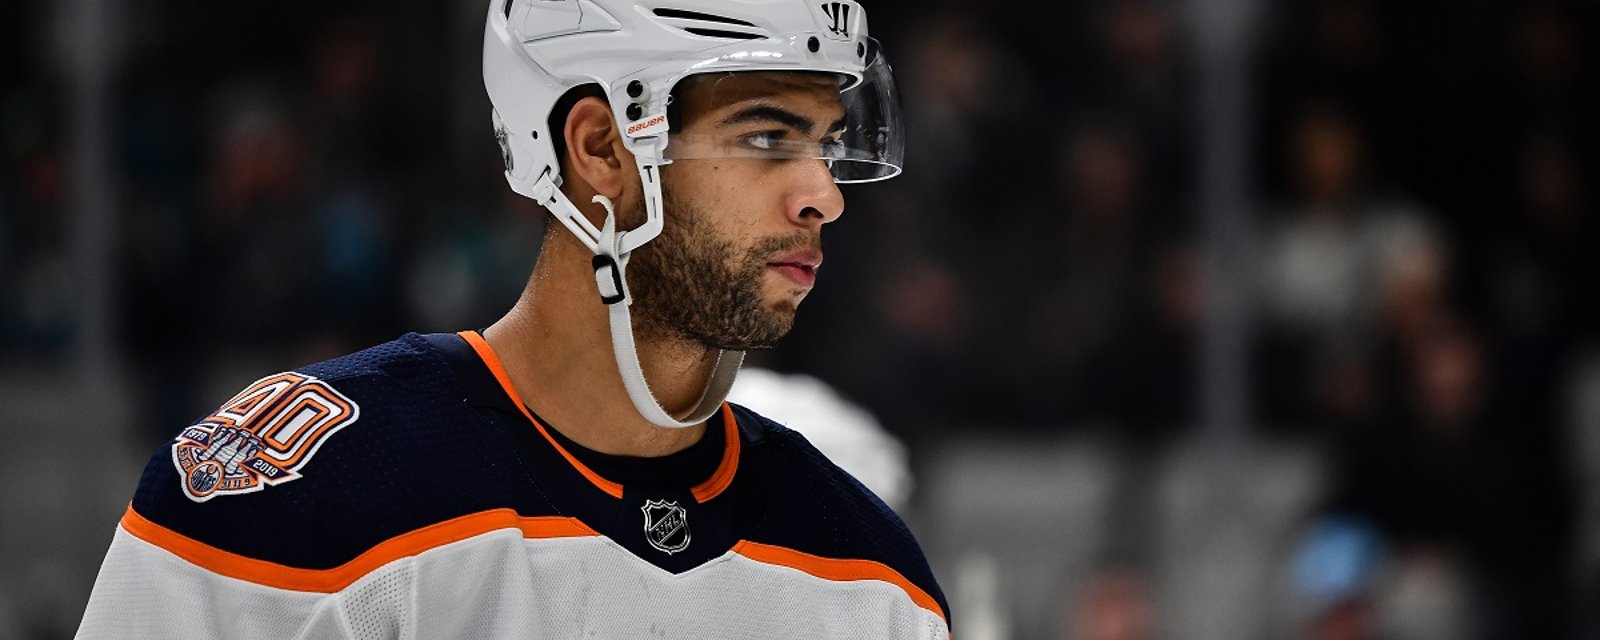 Darnell Nurse shares his thoughts on Zack MacEwen's kneeing suspension.